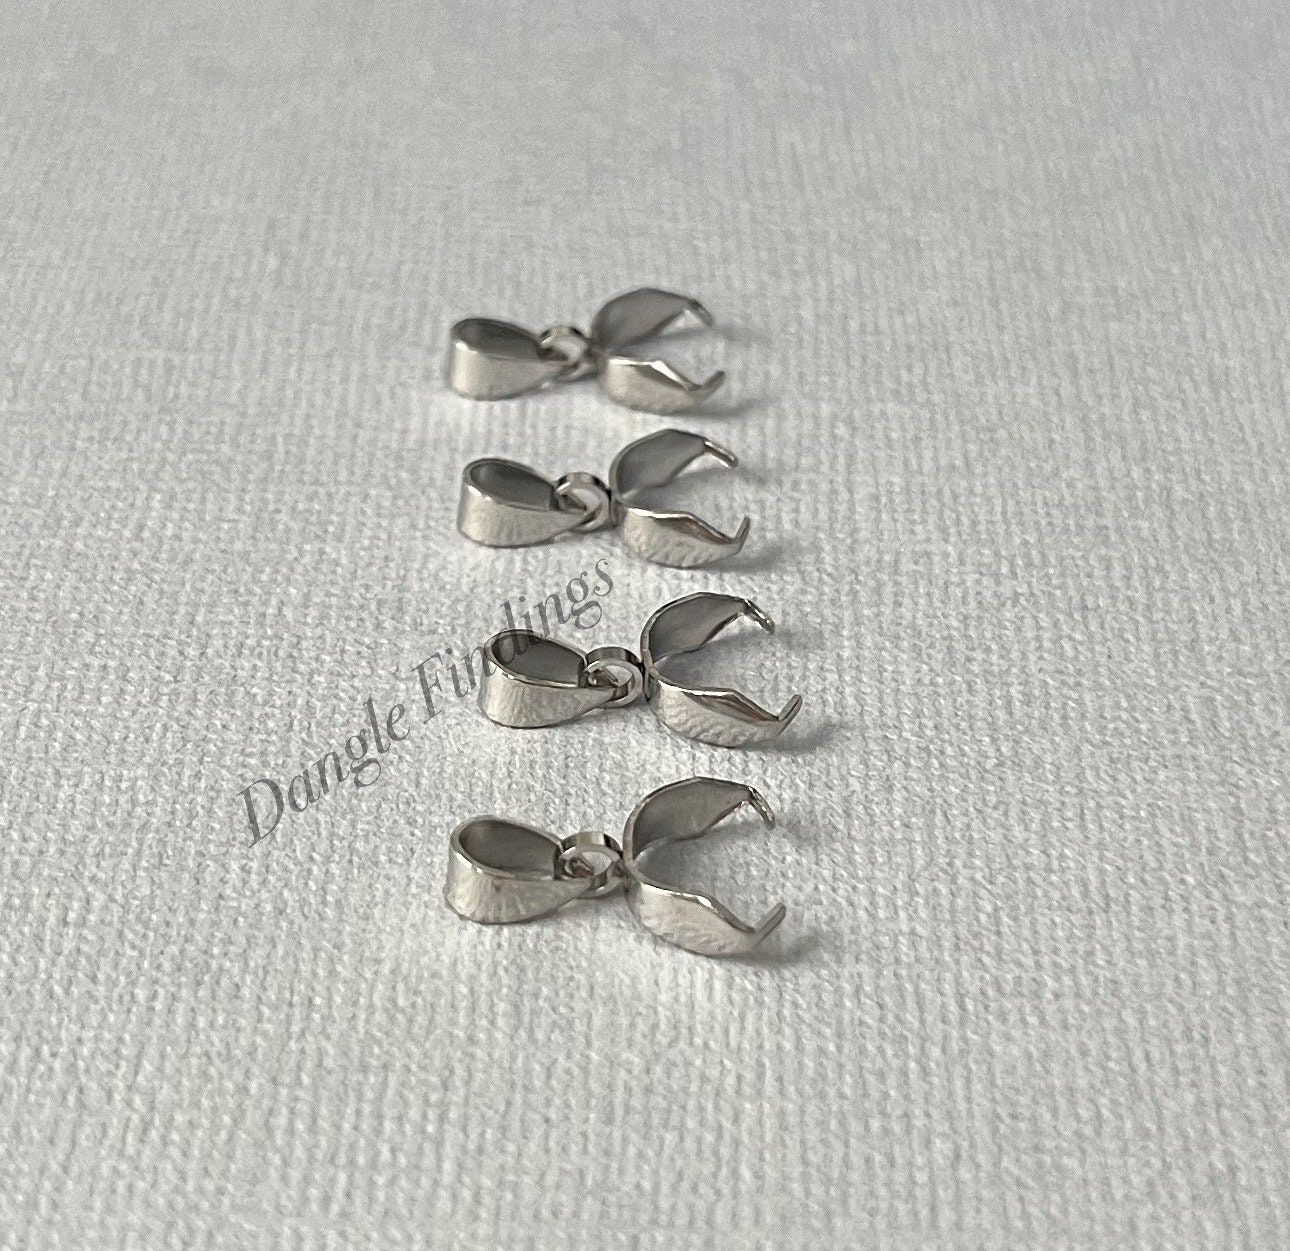 10 Stainless Steel Necklace Pinch Bails for DIY Jewelry Making